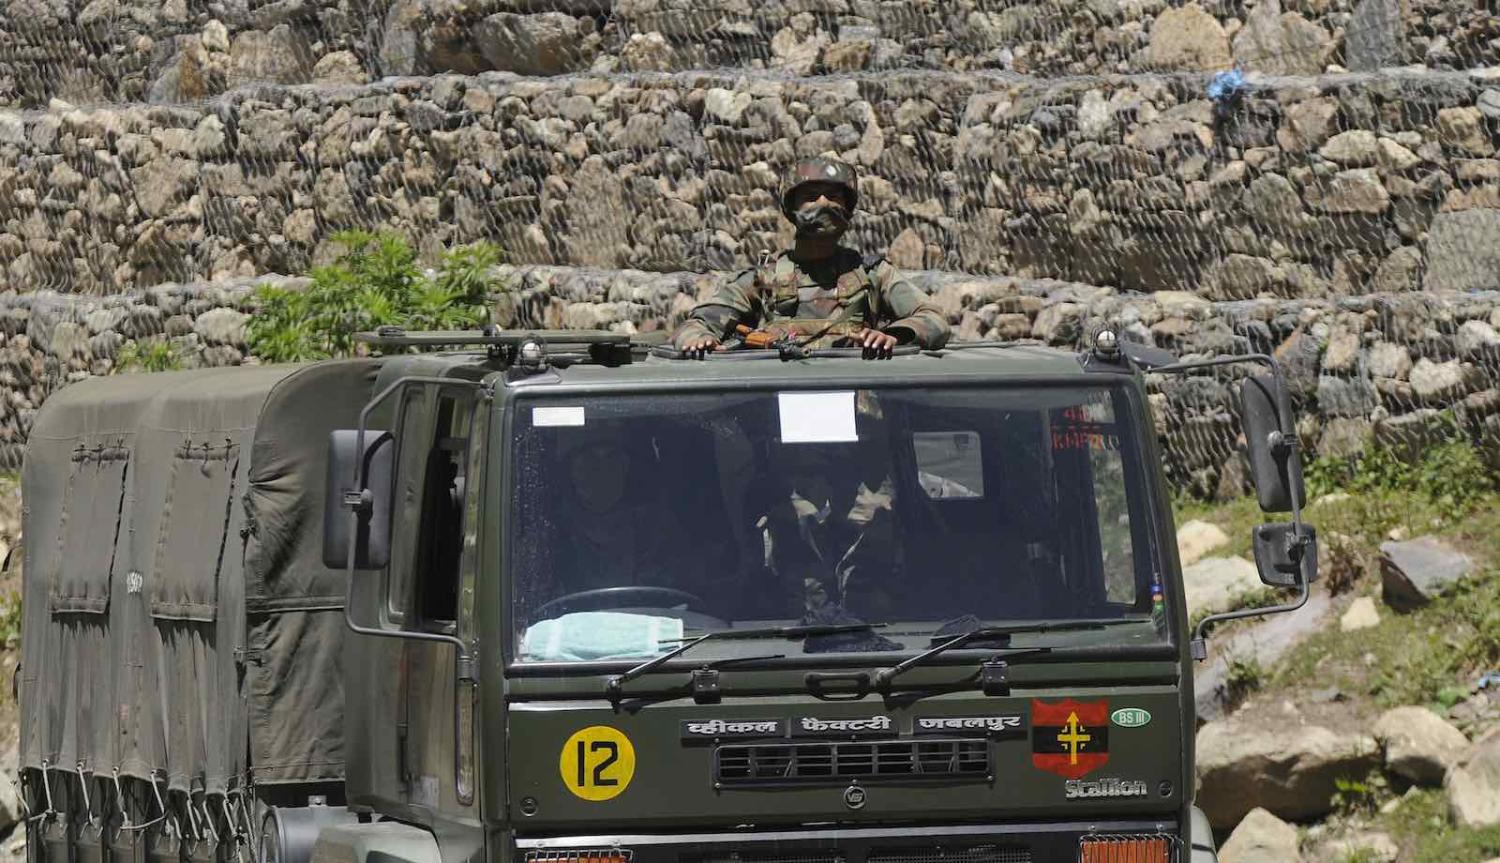 An Indian Army soldier looks out from a truck in a convoy to Ladakh, 22 June  2020 in Ganderbal, India (Waseem Andrabi/Hindustan Times via Getty Images)